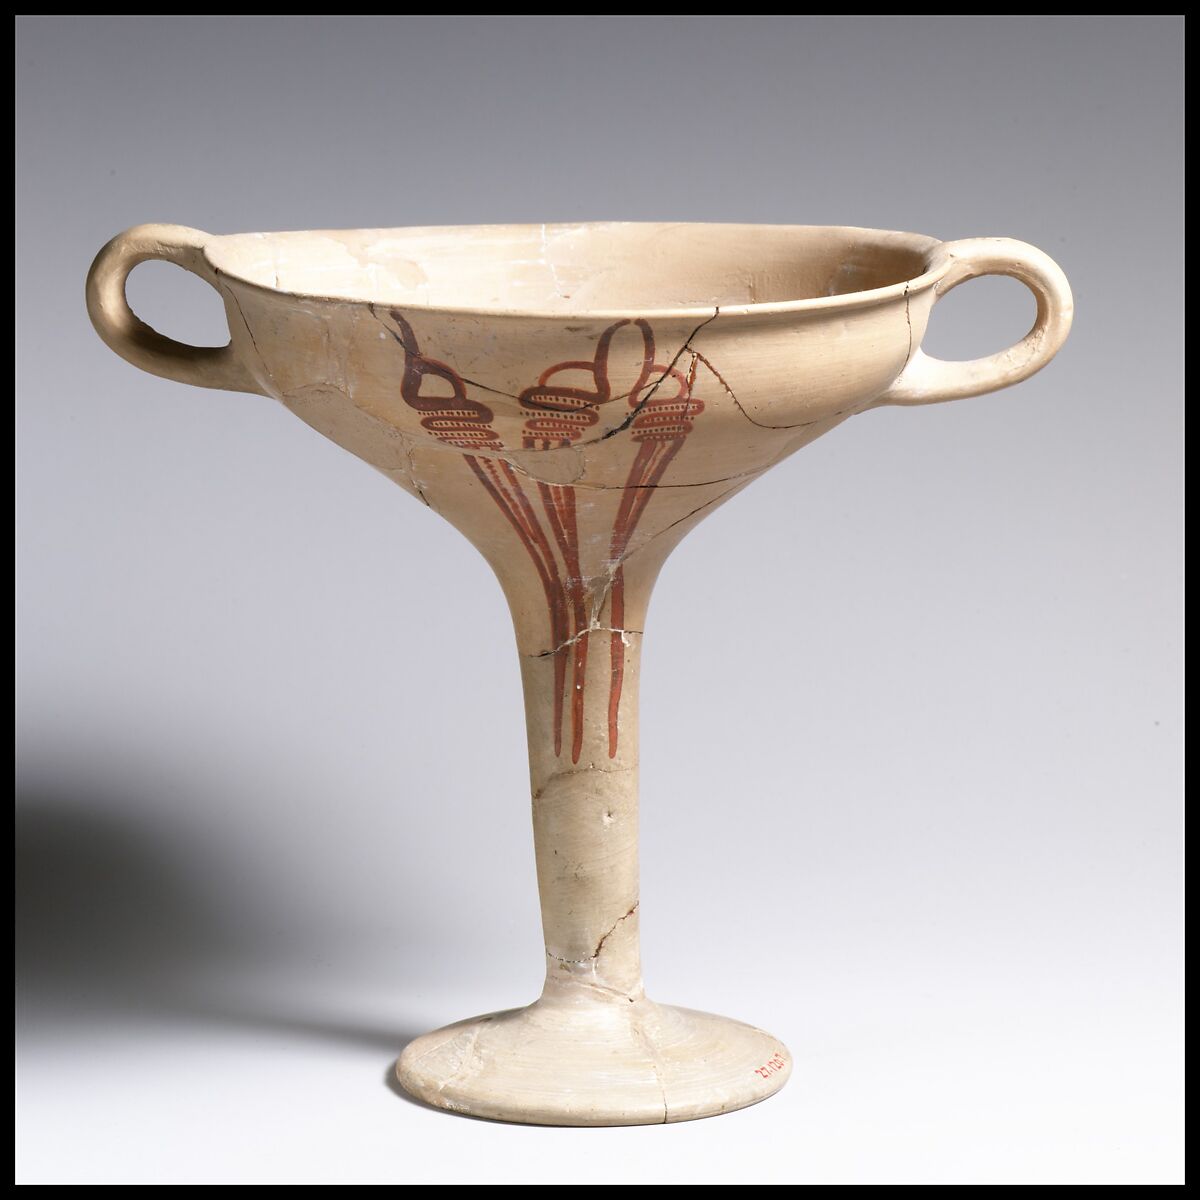 Terracotta kylix (drinking cup) with whorl shells, Terracotta, Mycenaean 